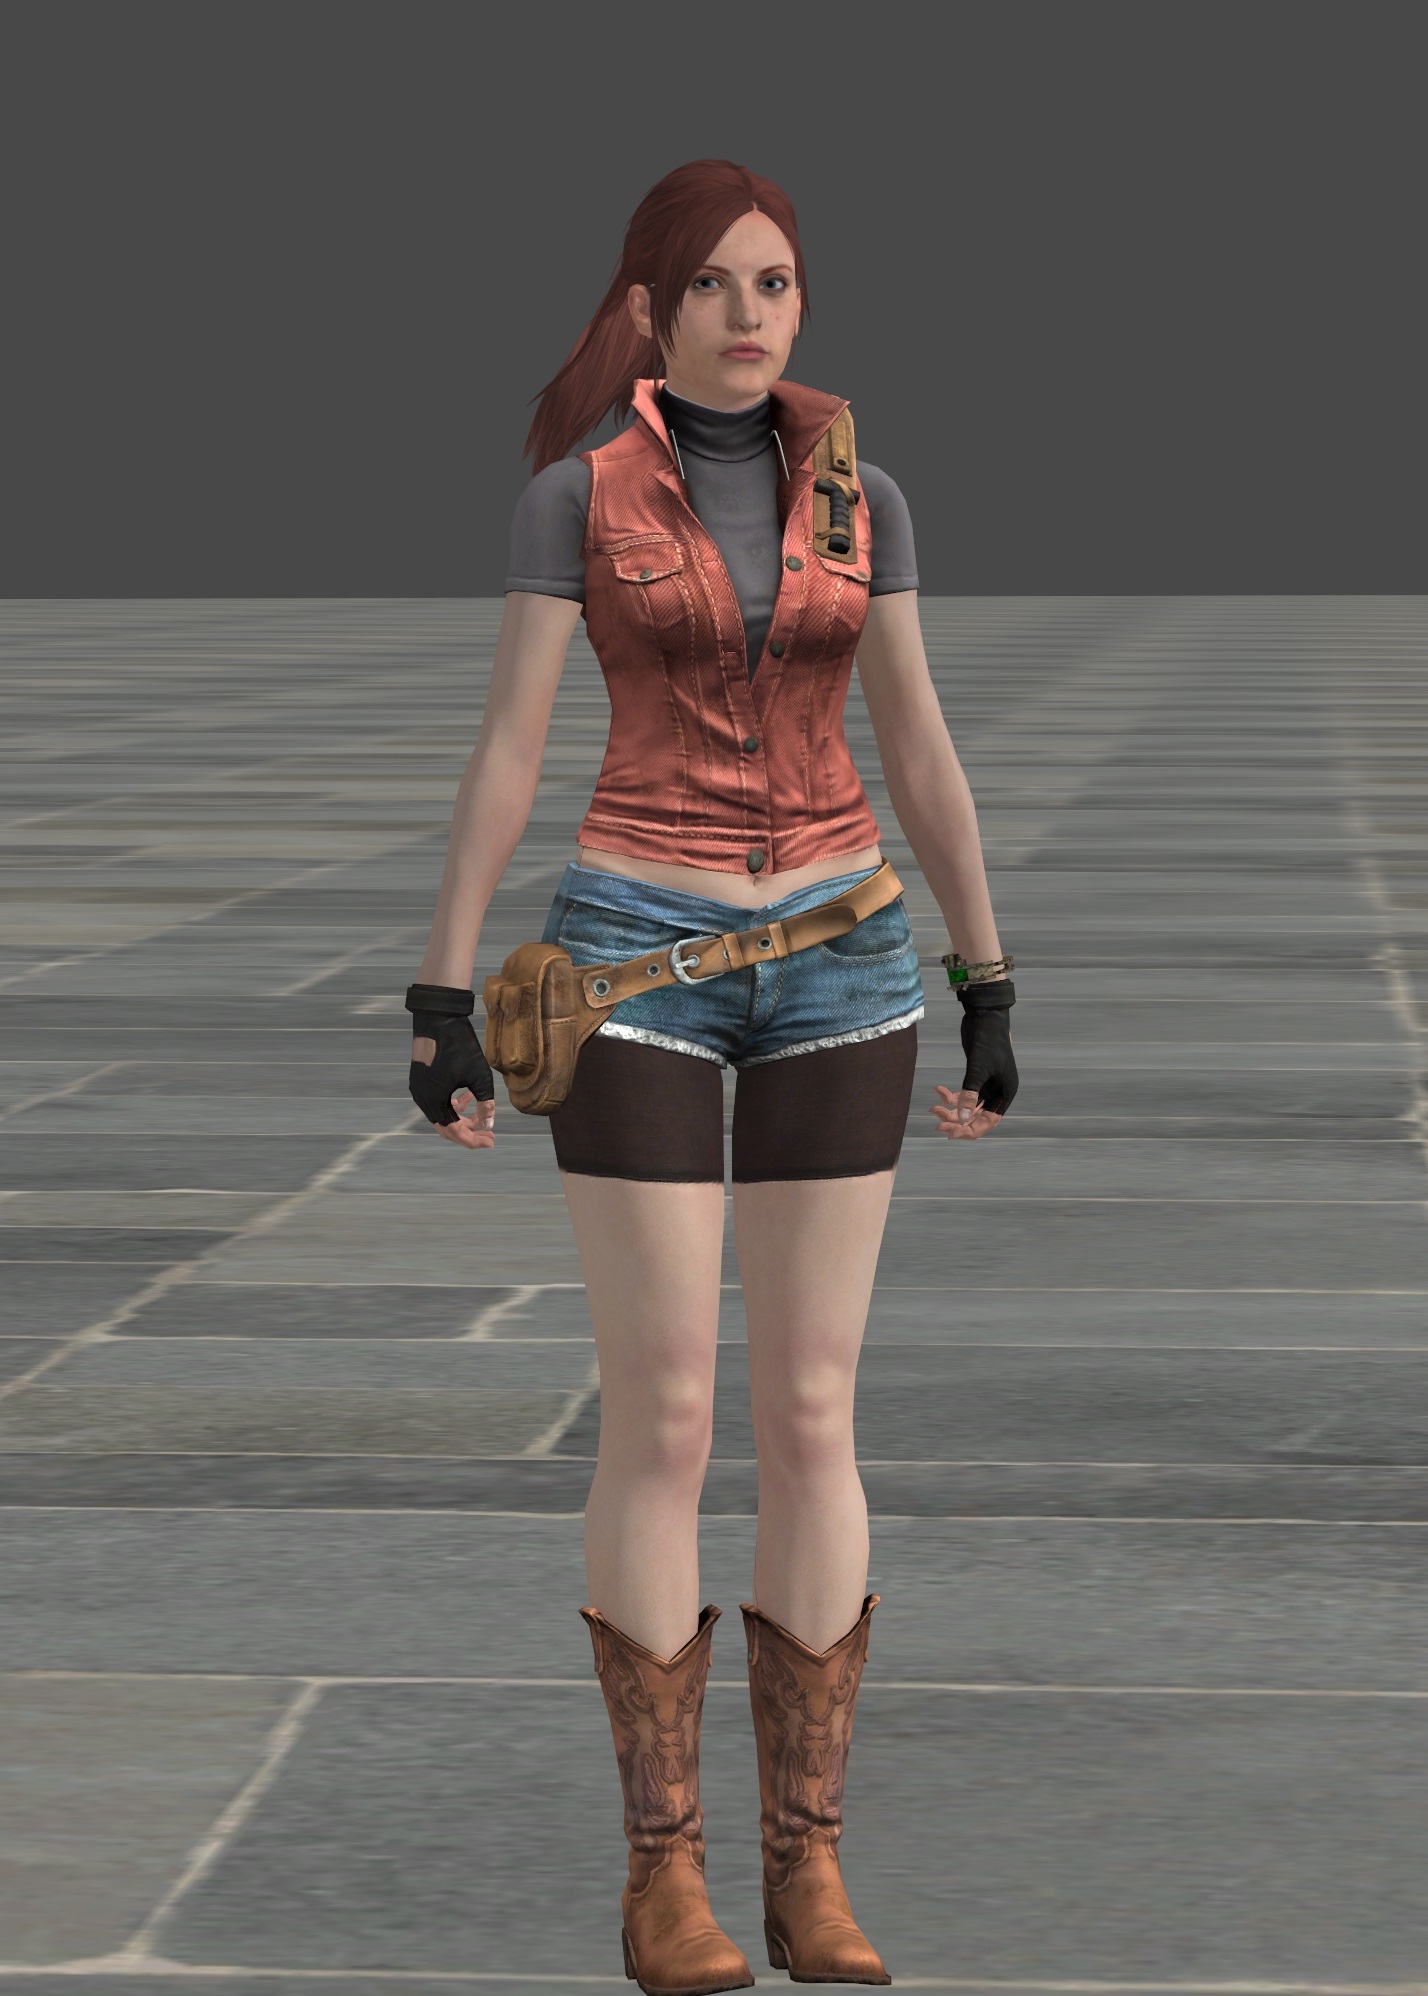 Classic Claire Redfield with Resident Evil 2 Remake Outfit addon